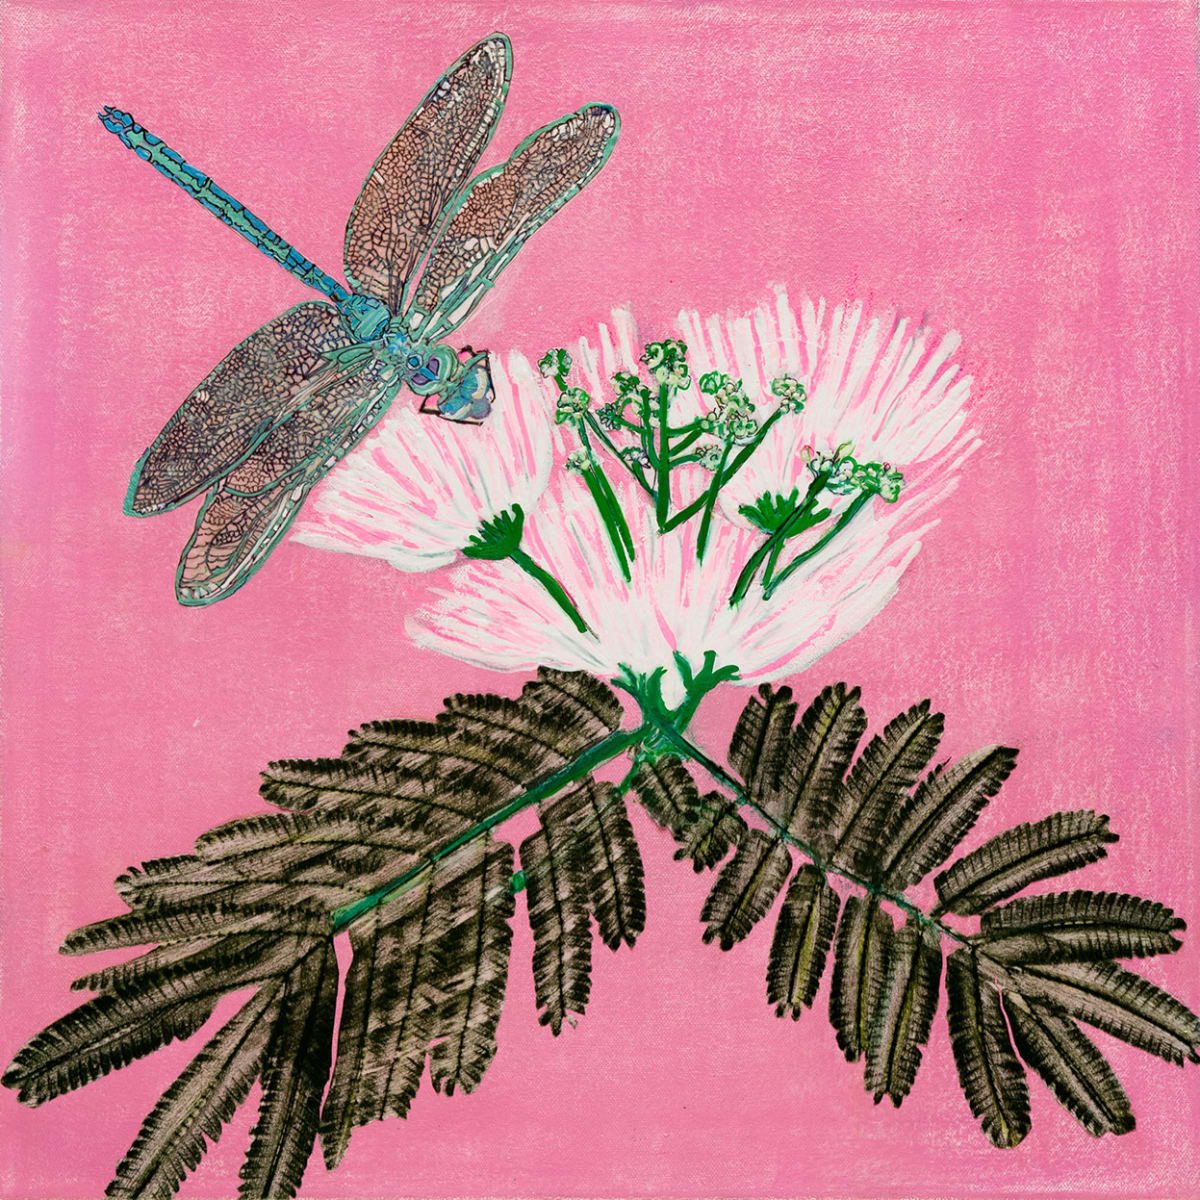 Dragonfly on Mimosa in Pink by Alexandra Anderson Bower 